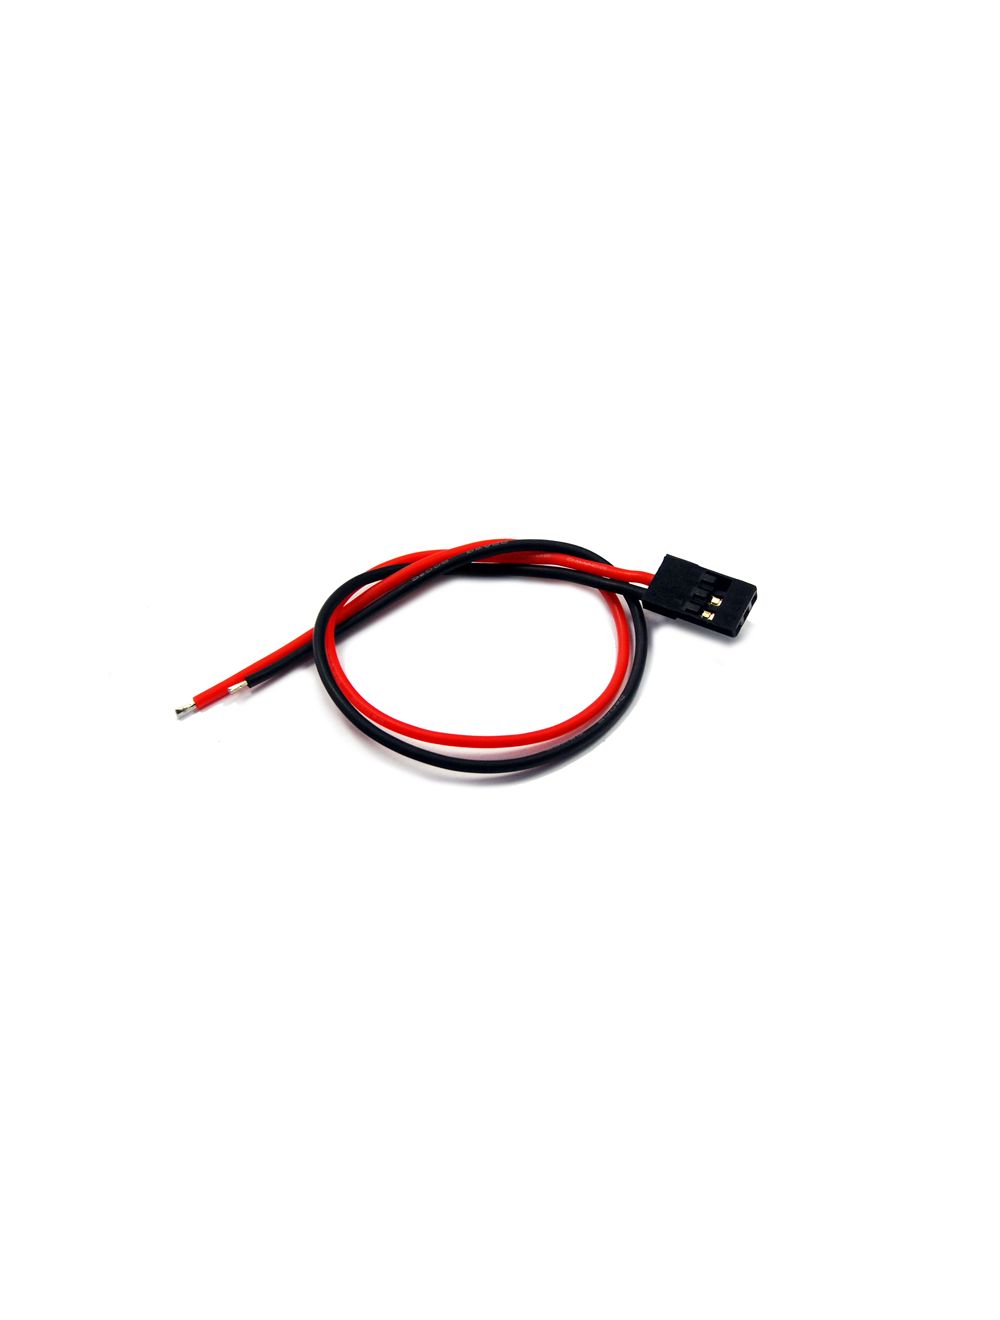 Overlander JR Battery Lead Silicone Wire 2594